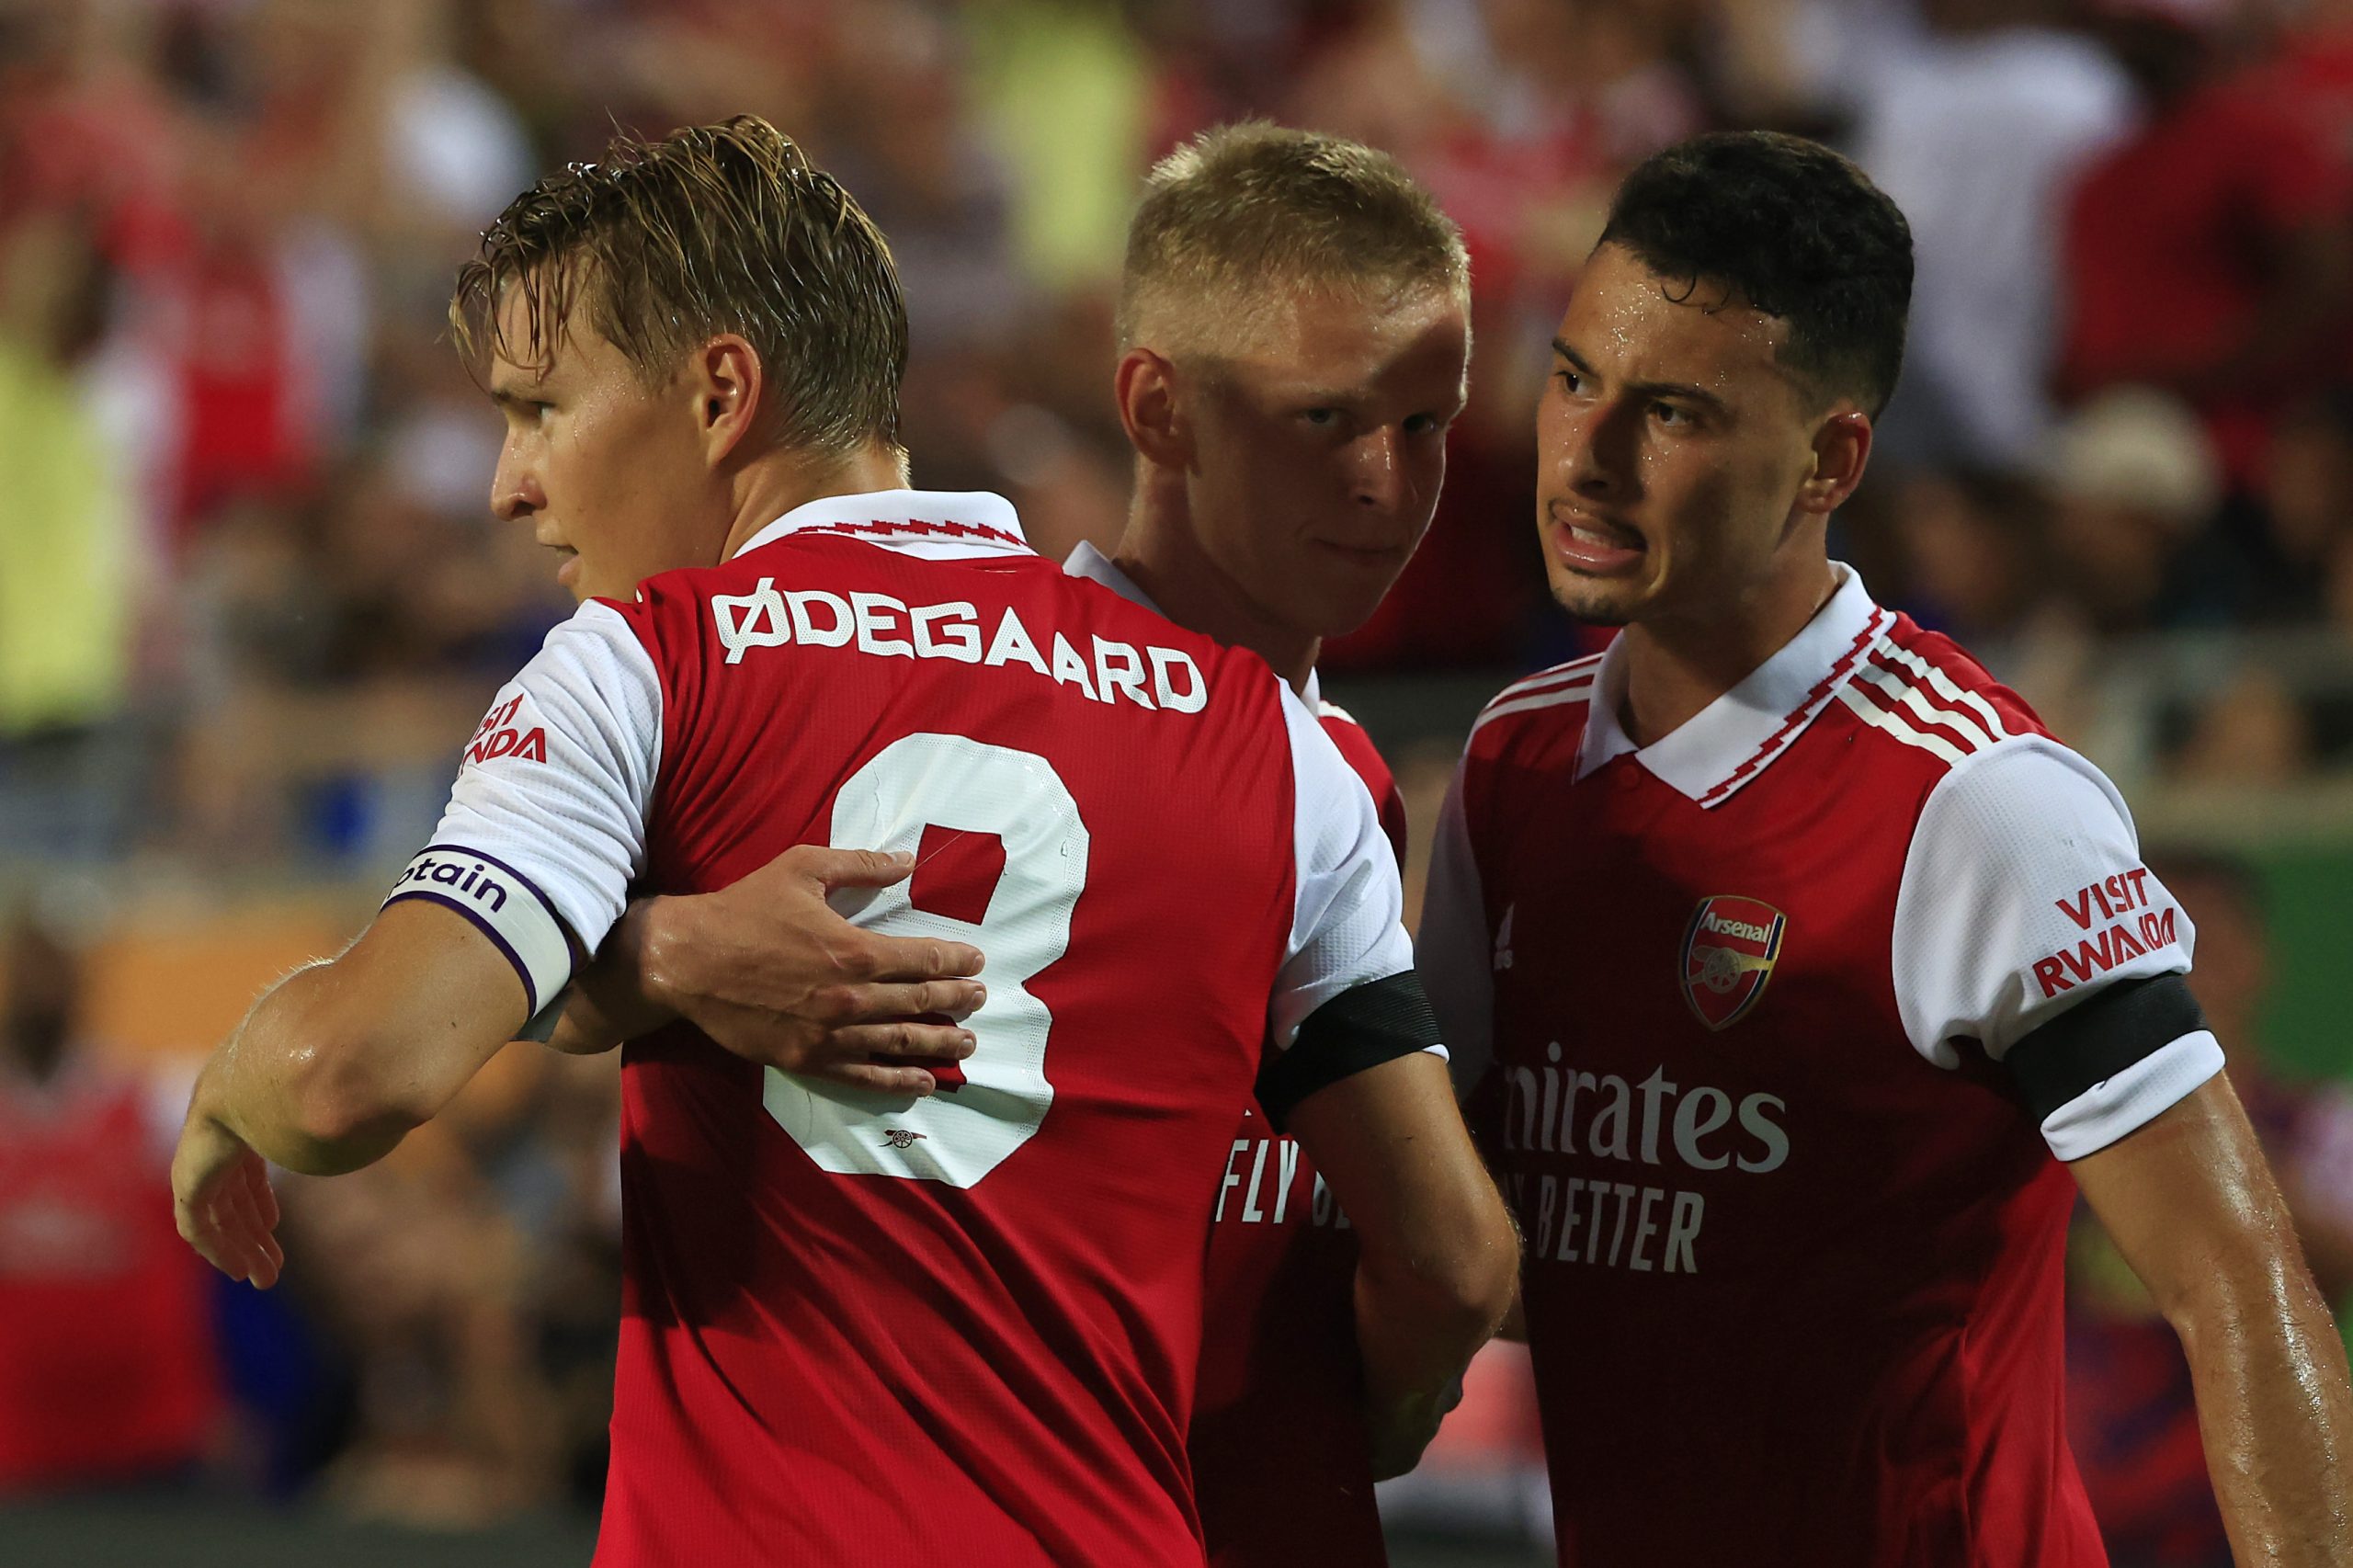 Martin Odegaard of Arsenal celebrates with teammates Oleksandr Zinchenko and Gabriel Martinelli after scoring a goal in a friendly against Chelsea.